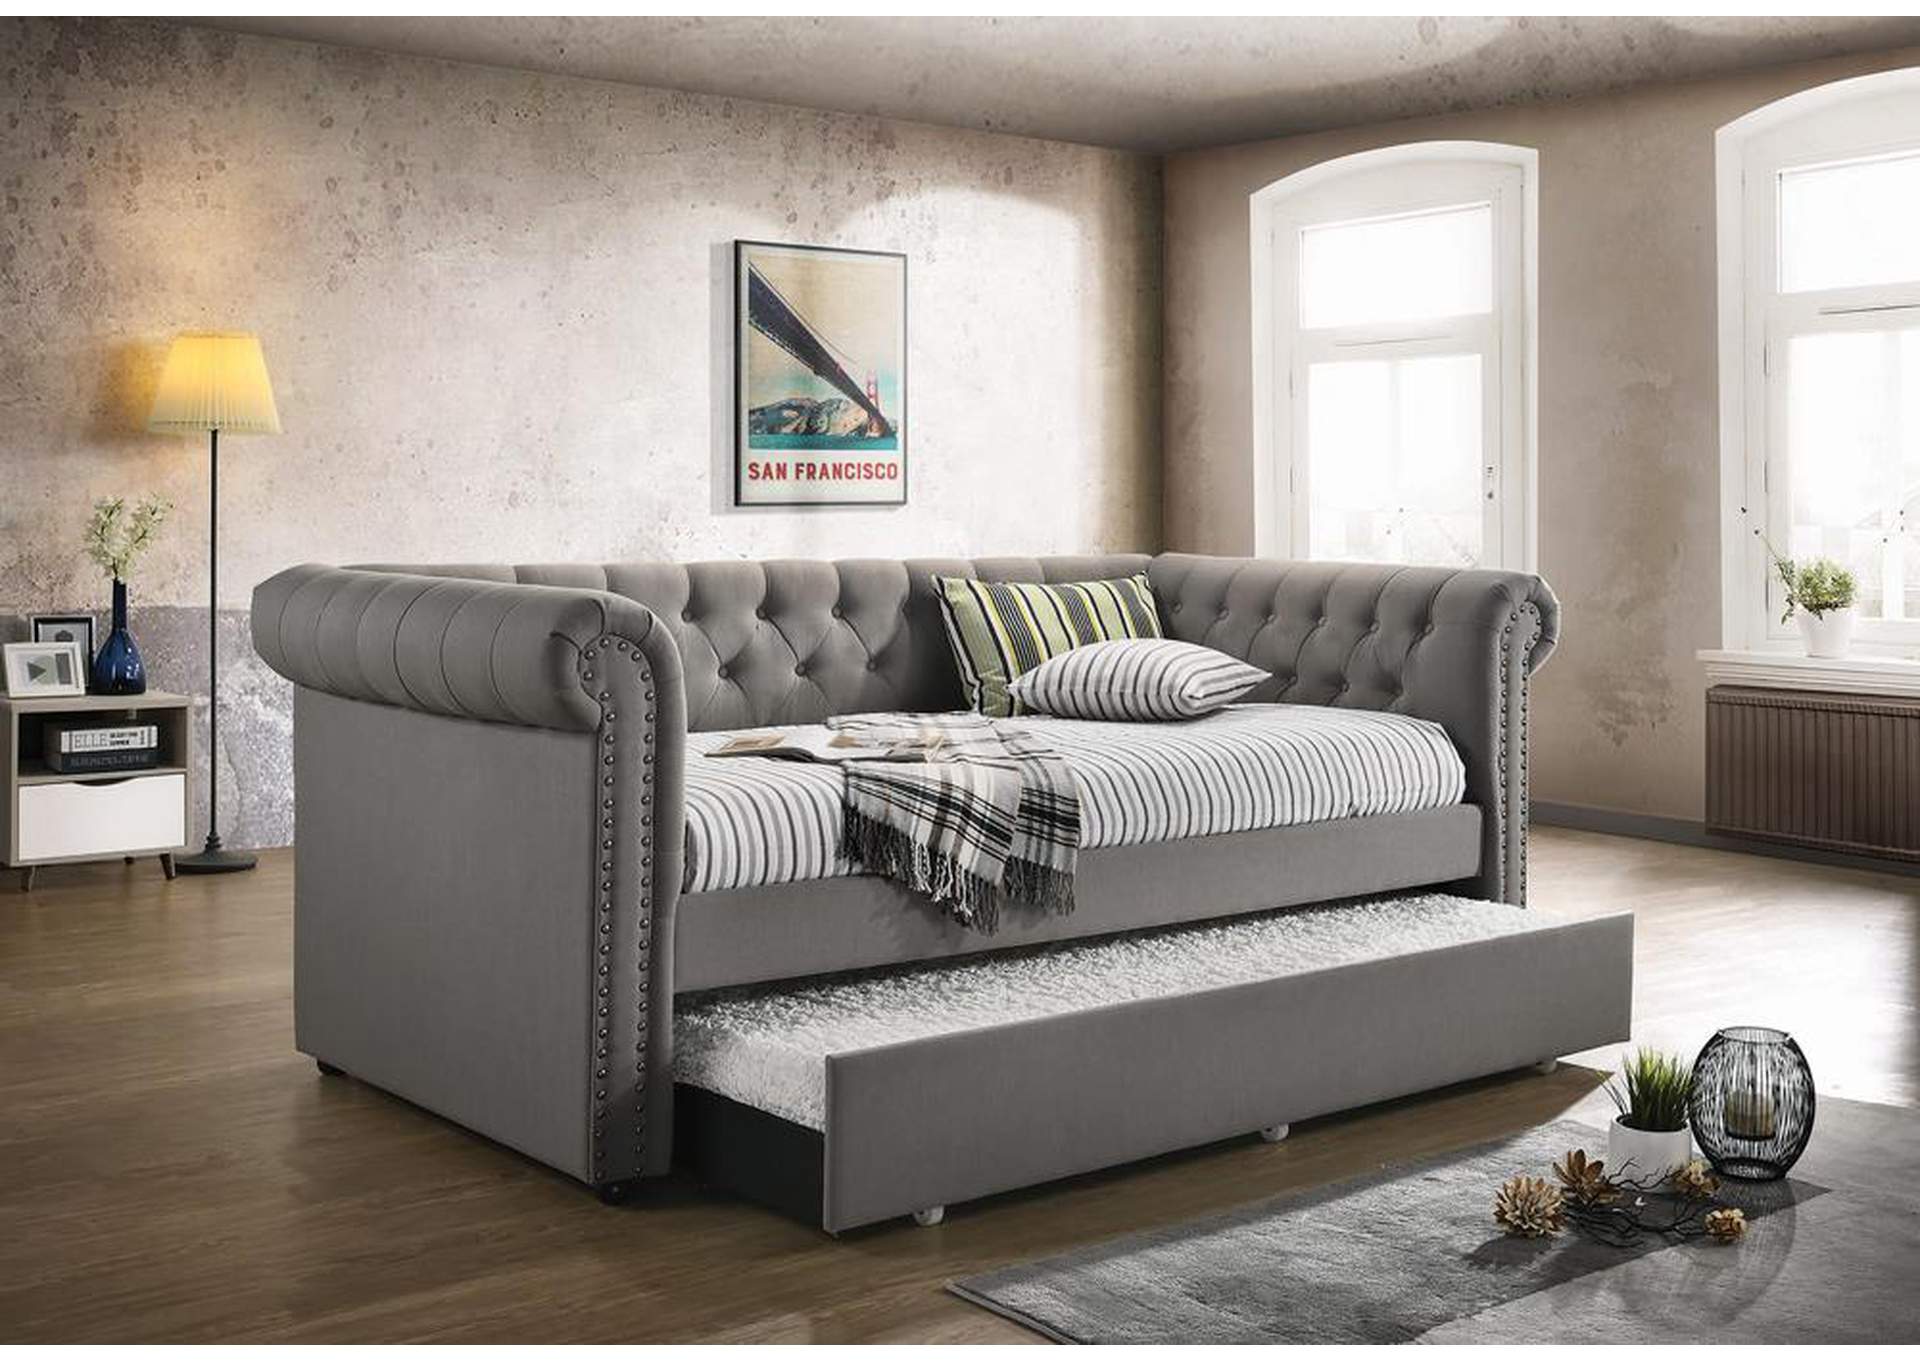 Furniture Expo Baton Rouge La Kepner Grey Chesterfield Daybed